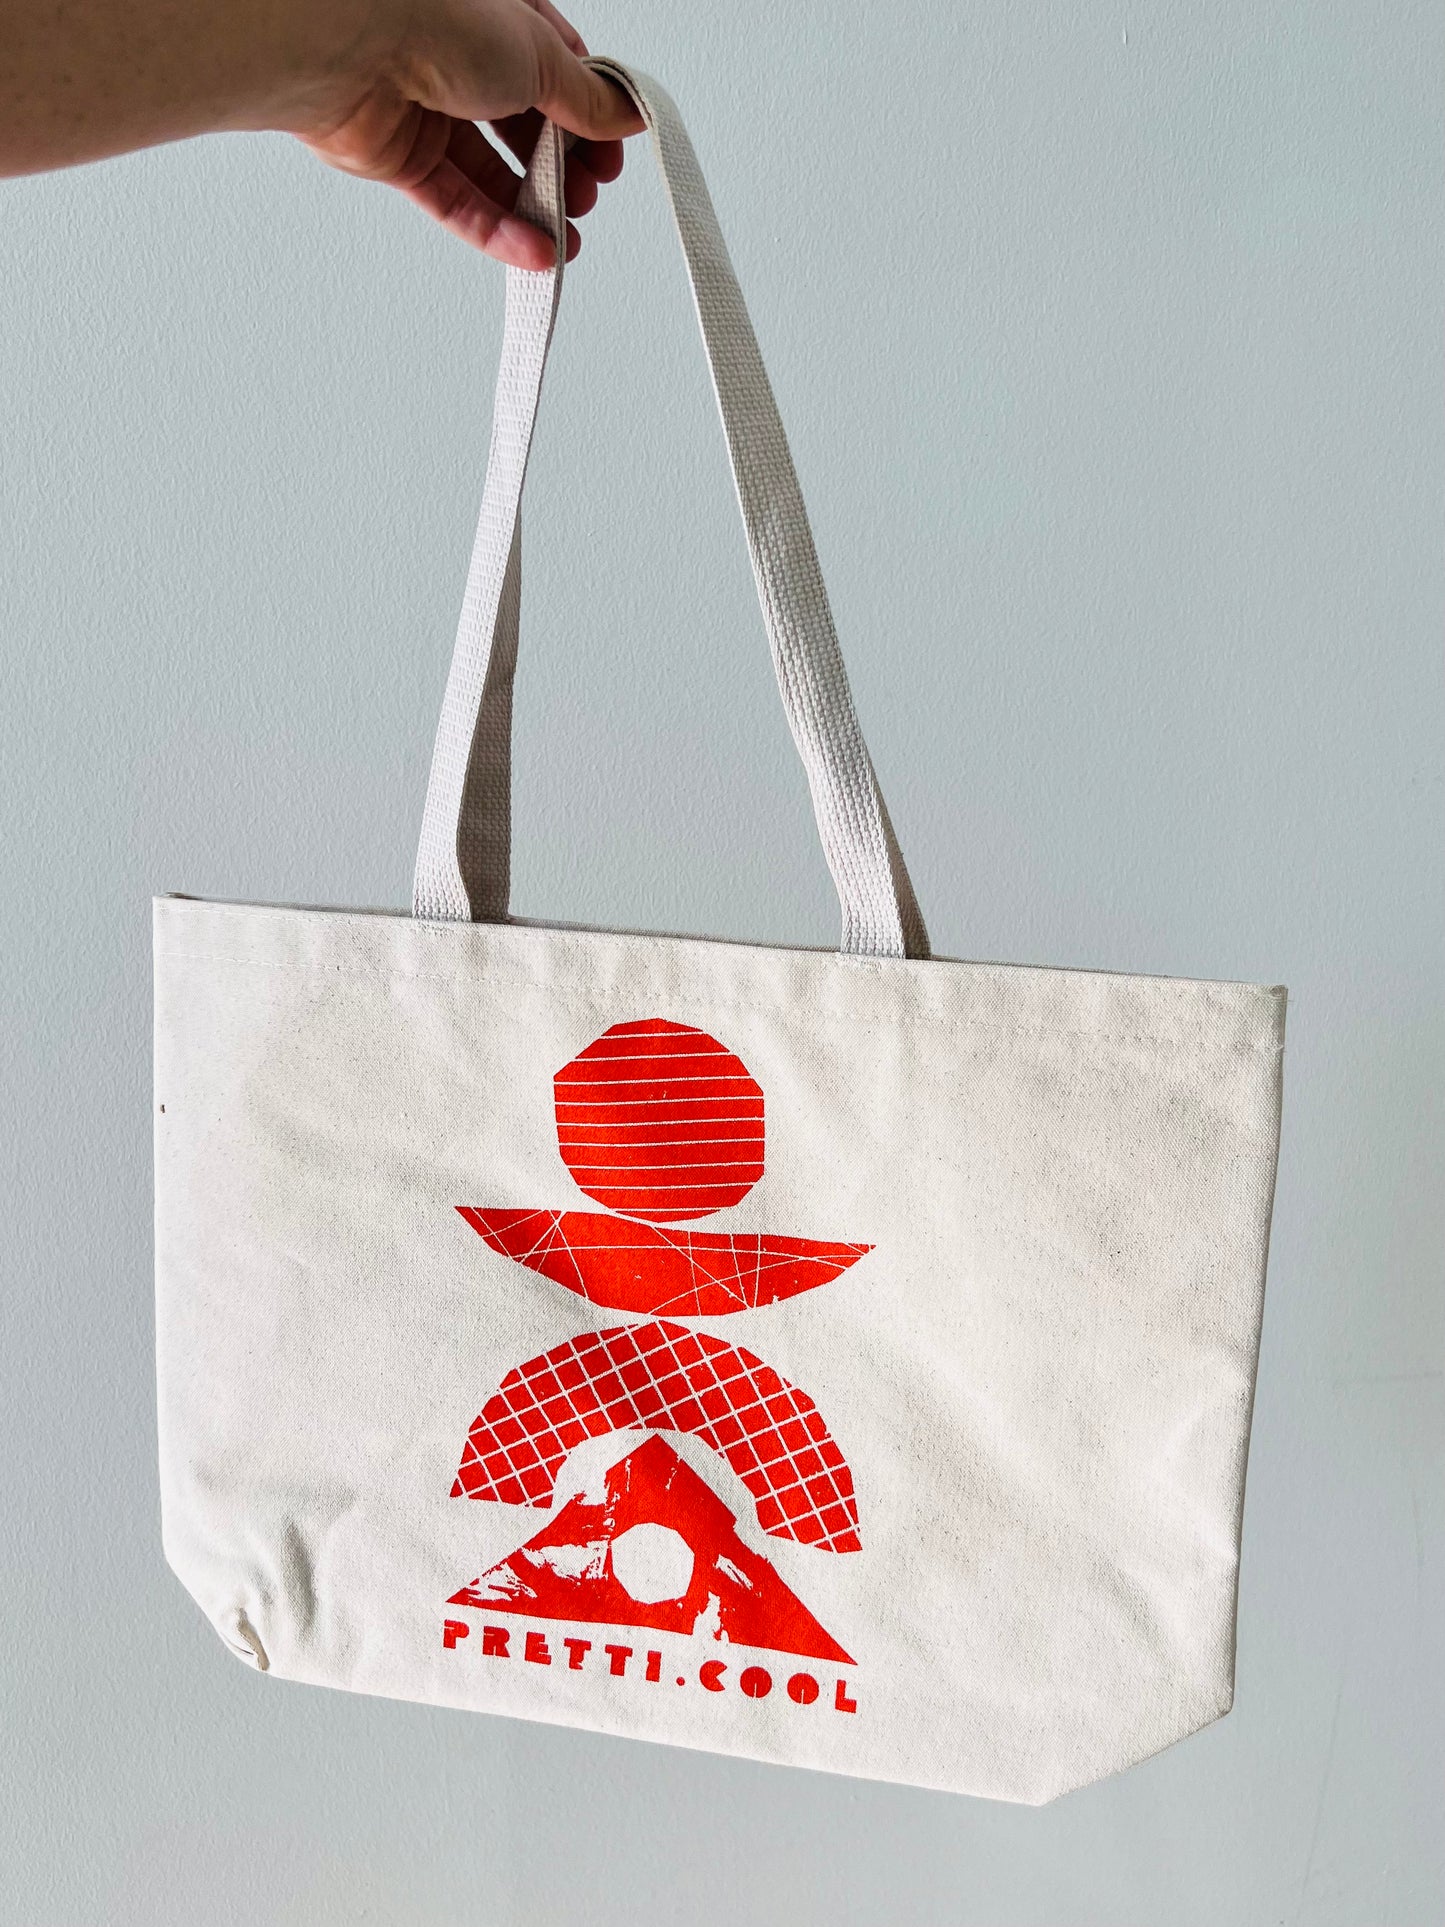 The pretti.cool tote in natural canvas w/ a red/orange print on the front.